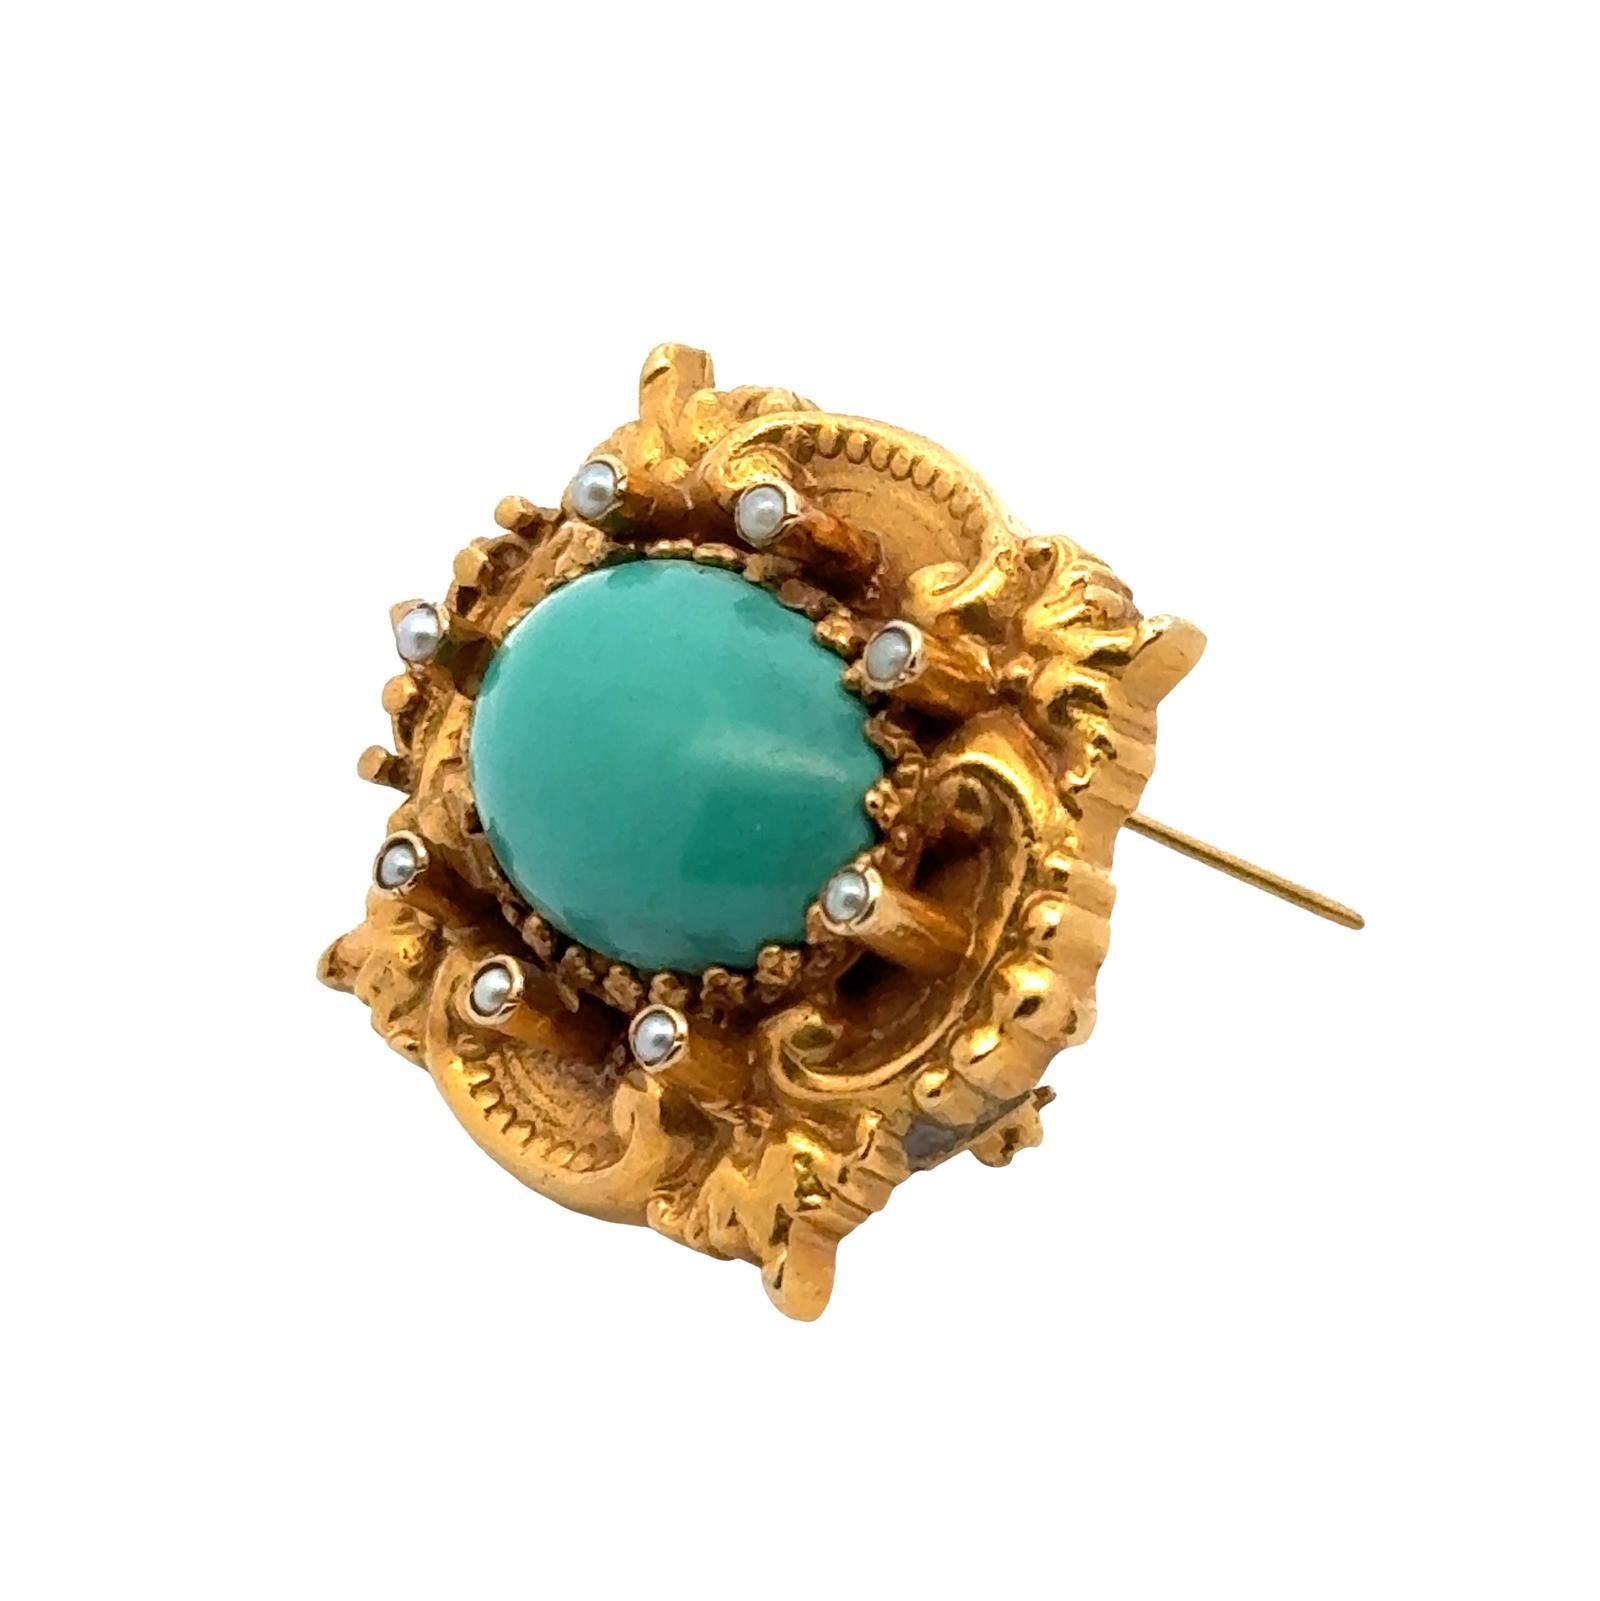 Original Art Nouveau turquoise and seed pearl brooch handcrafted in 14 karat yellow gold. The pin features a natural blue cabochon turquoise gemstone with seed pearl accents. the brooch measures 1.25 x 1.50 inches. Weight: 18 grams.